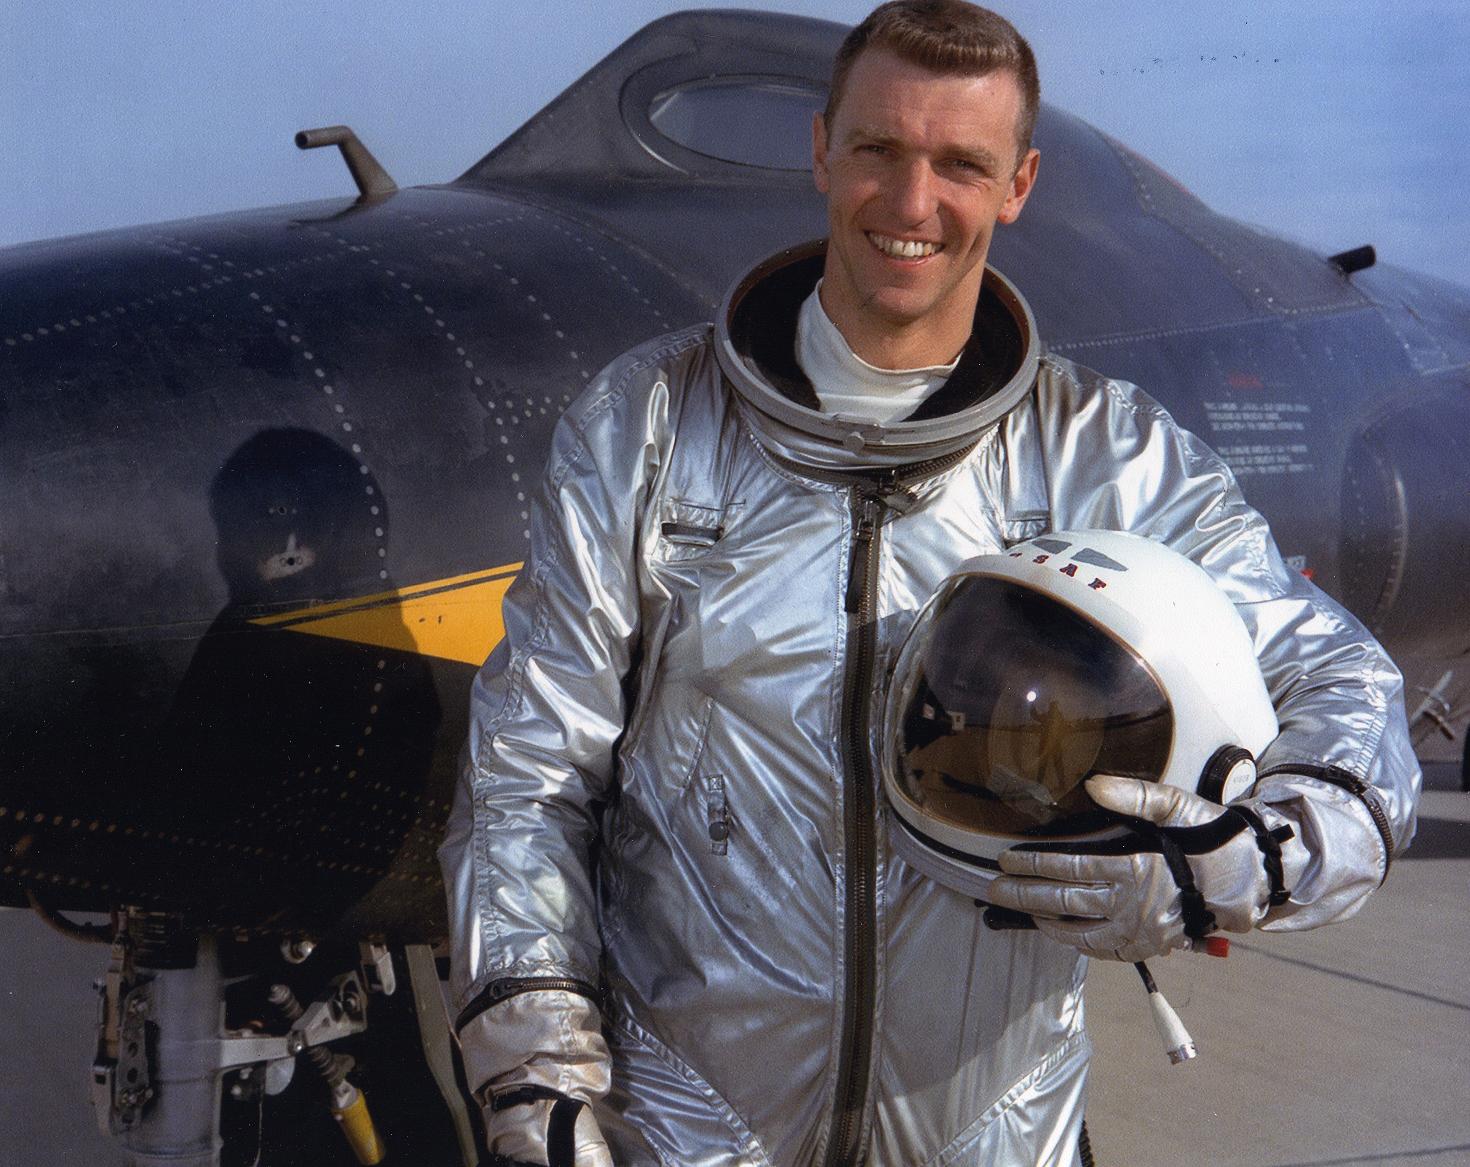 Captain Joe Henry Engle, United States Air Force